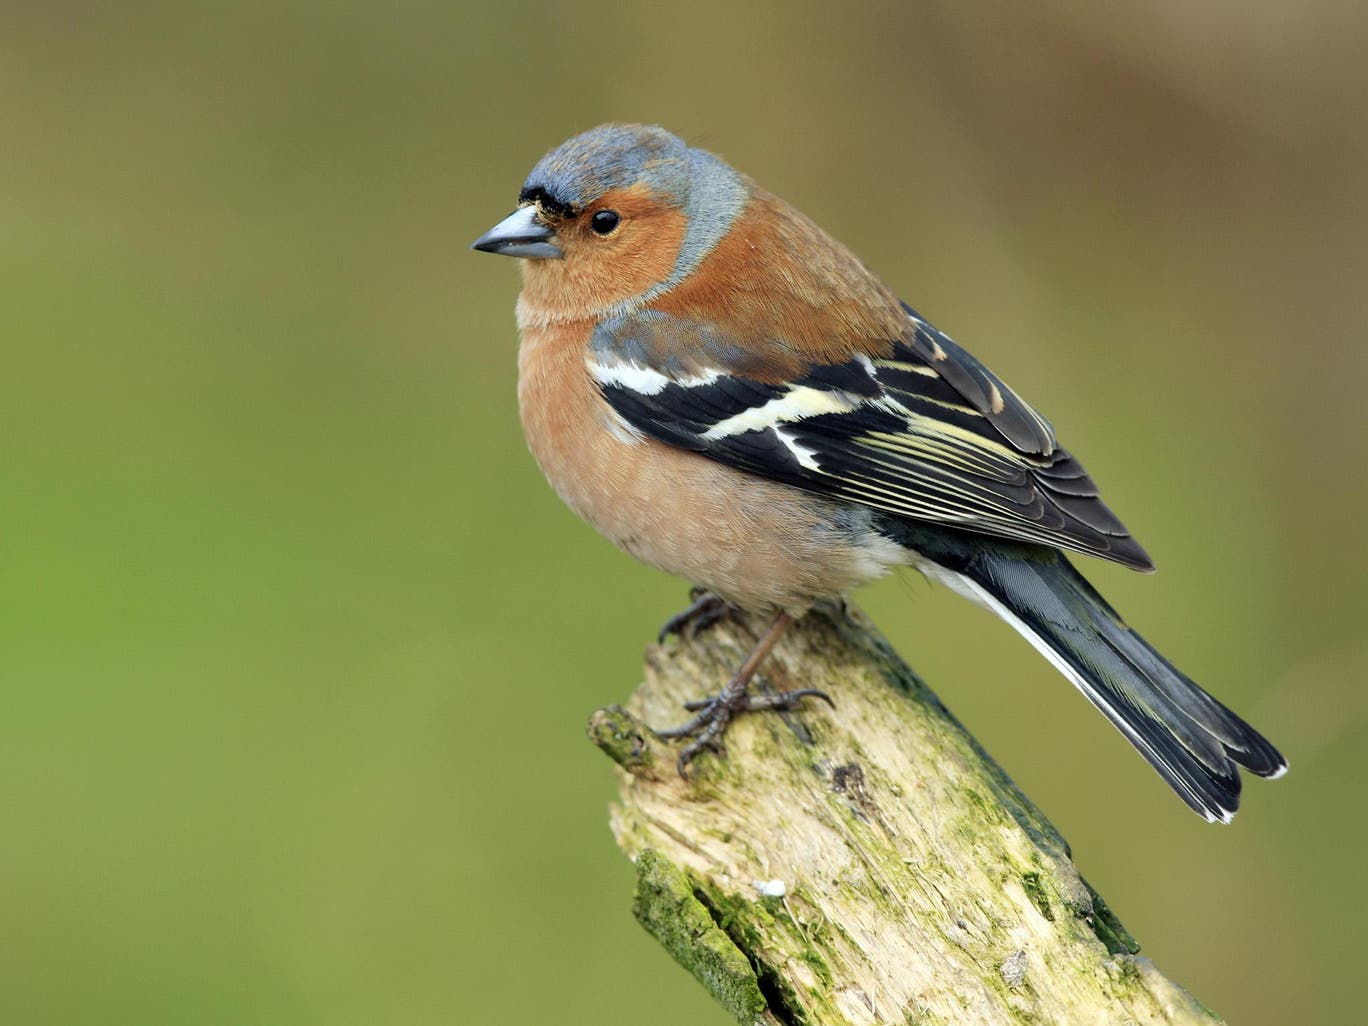 Enthusiasts trap chaffinches and train them to sing in contests